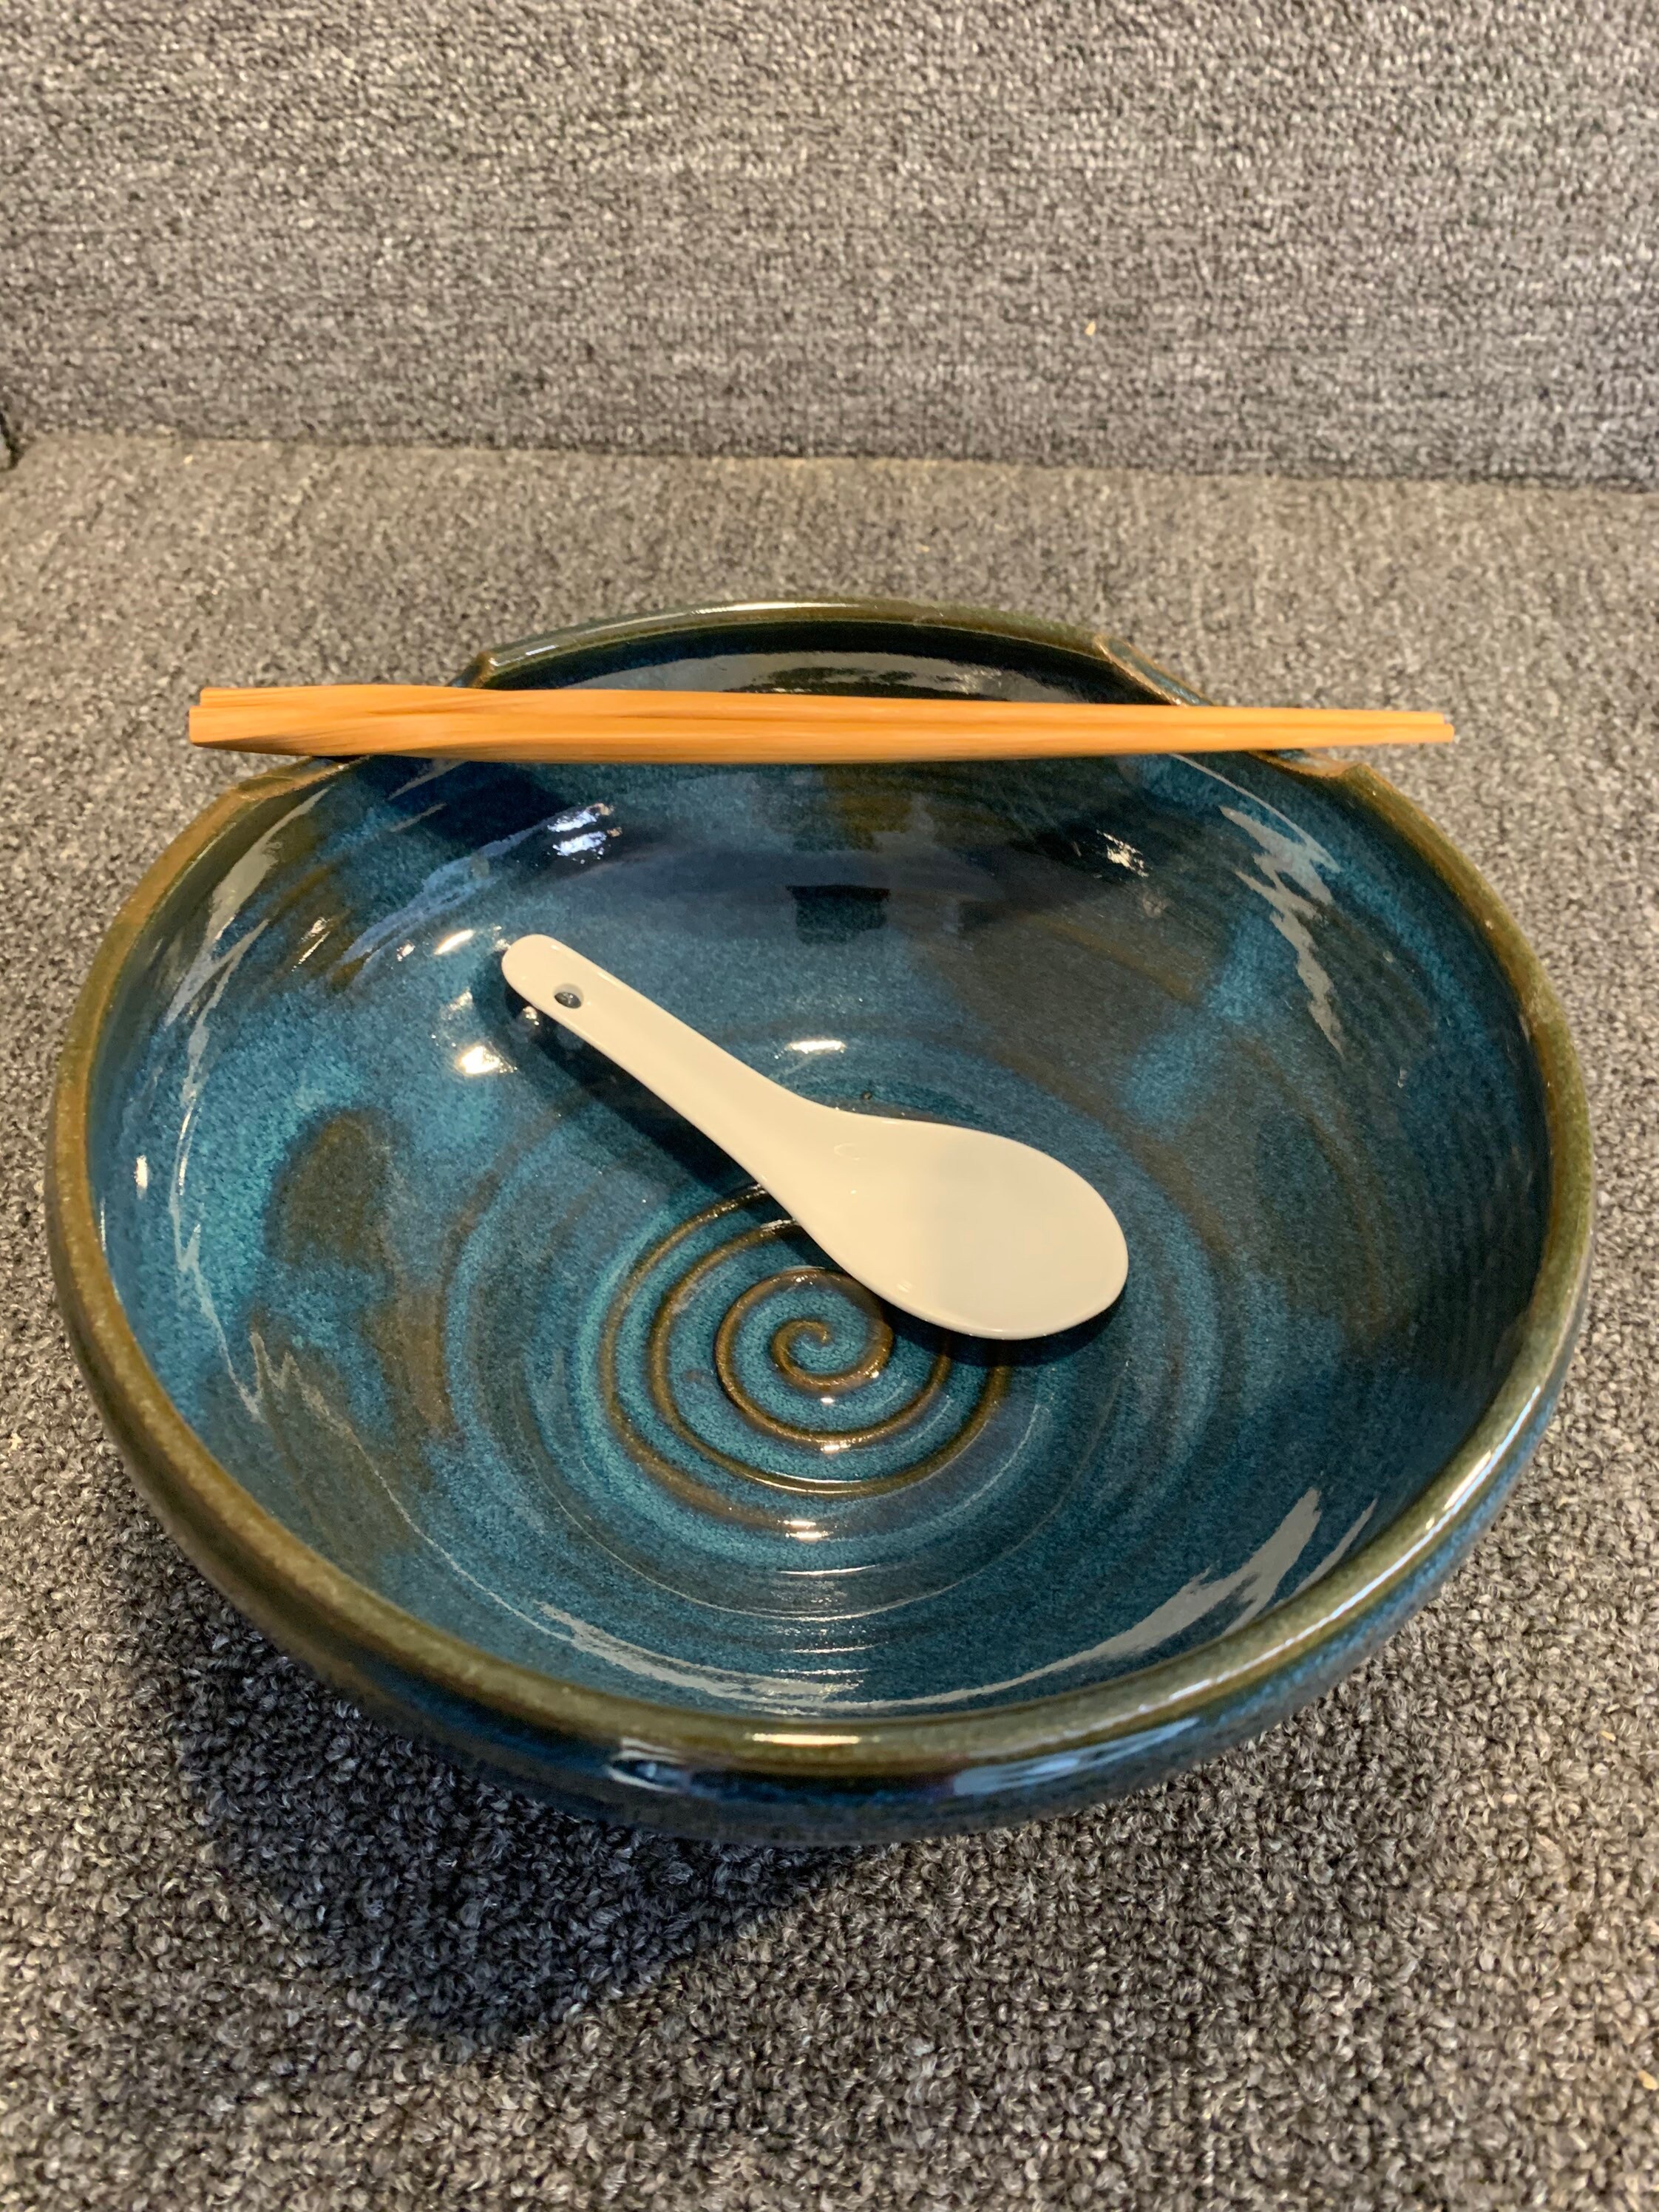 4 Teal Or Greenish Turquoise Ramen Bowls And